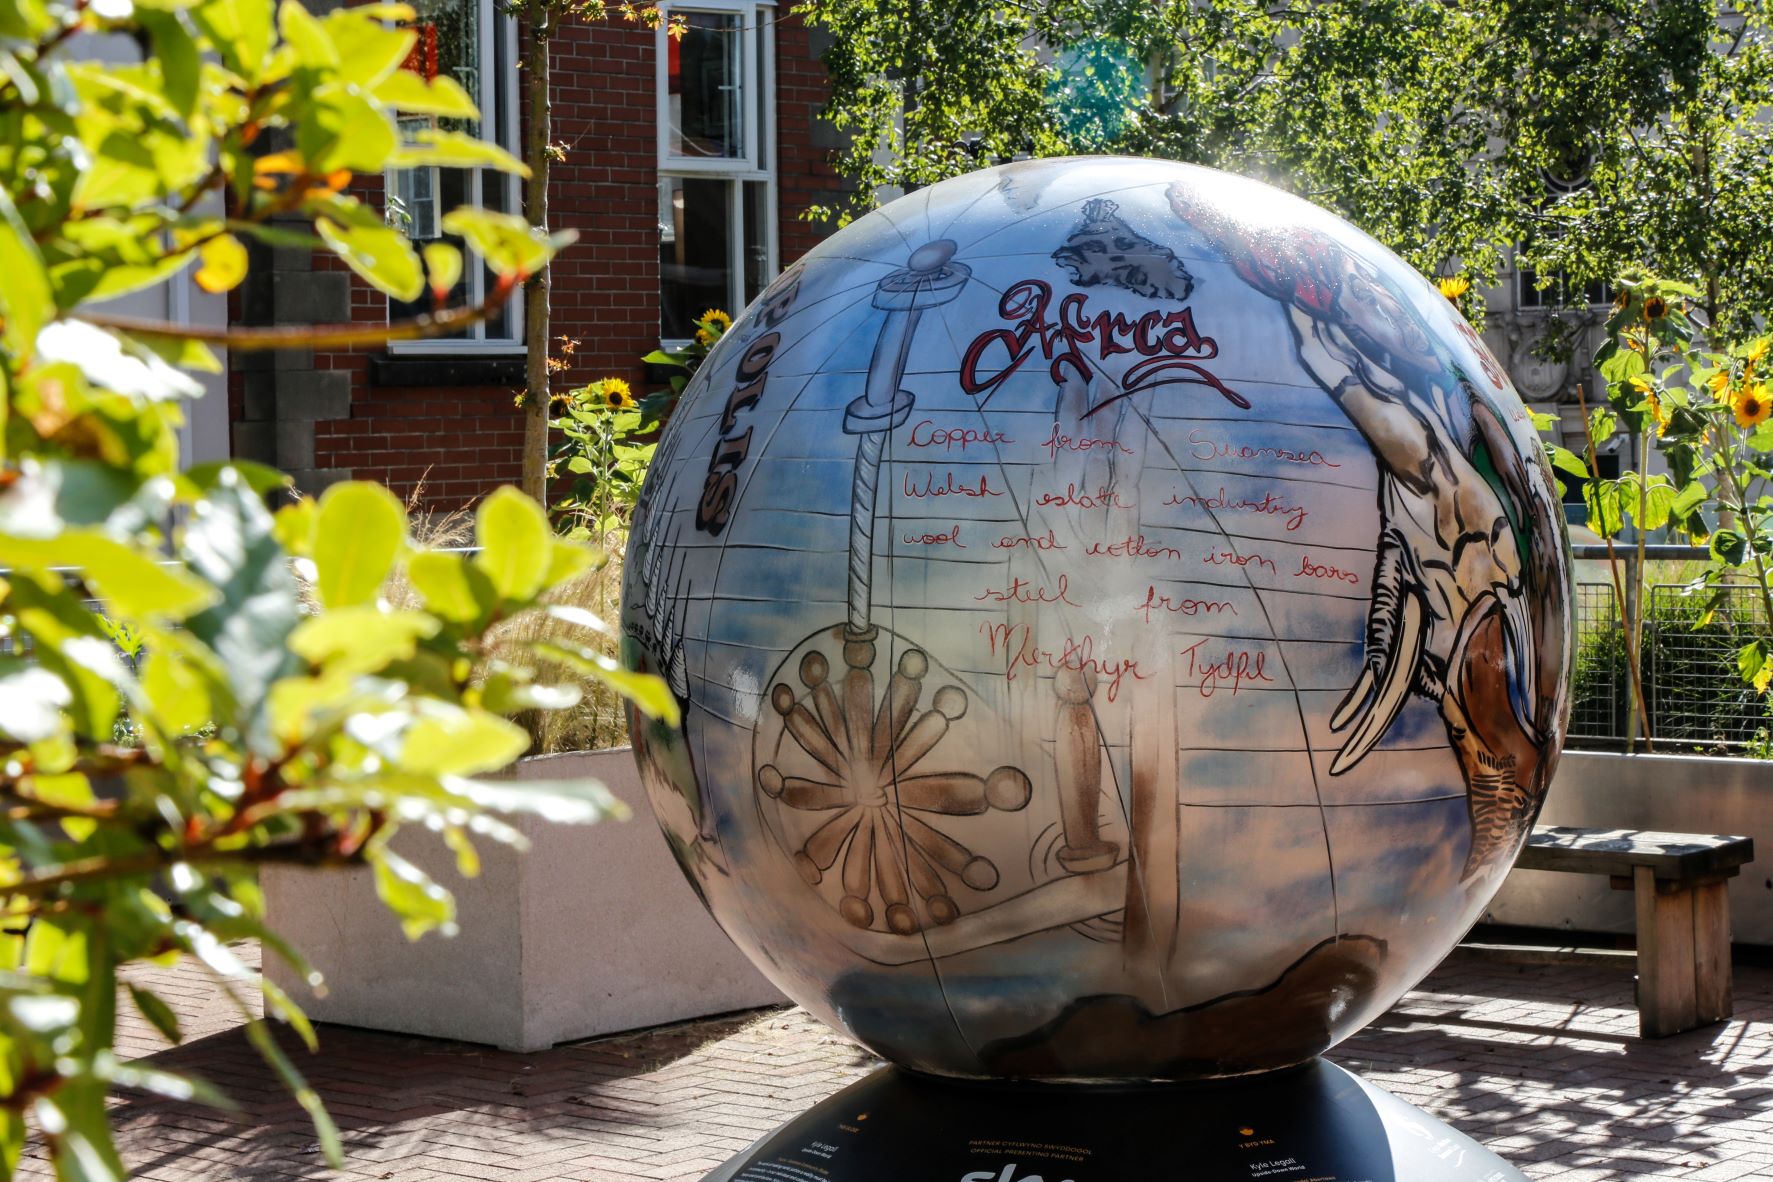 The World Reimagined globe trail. Image of a large painted globe in the gallery garden